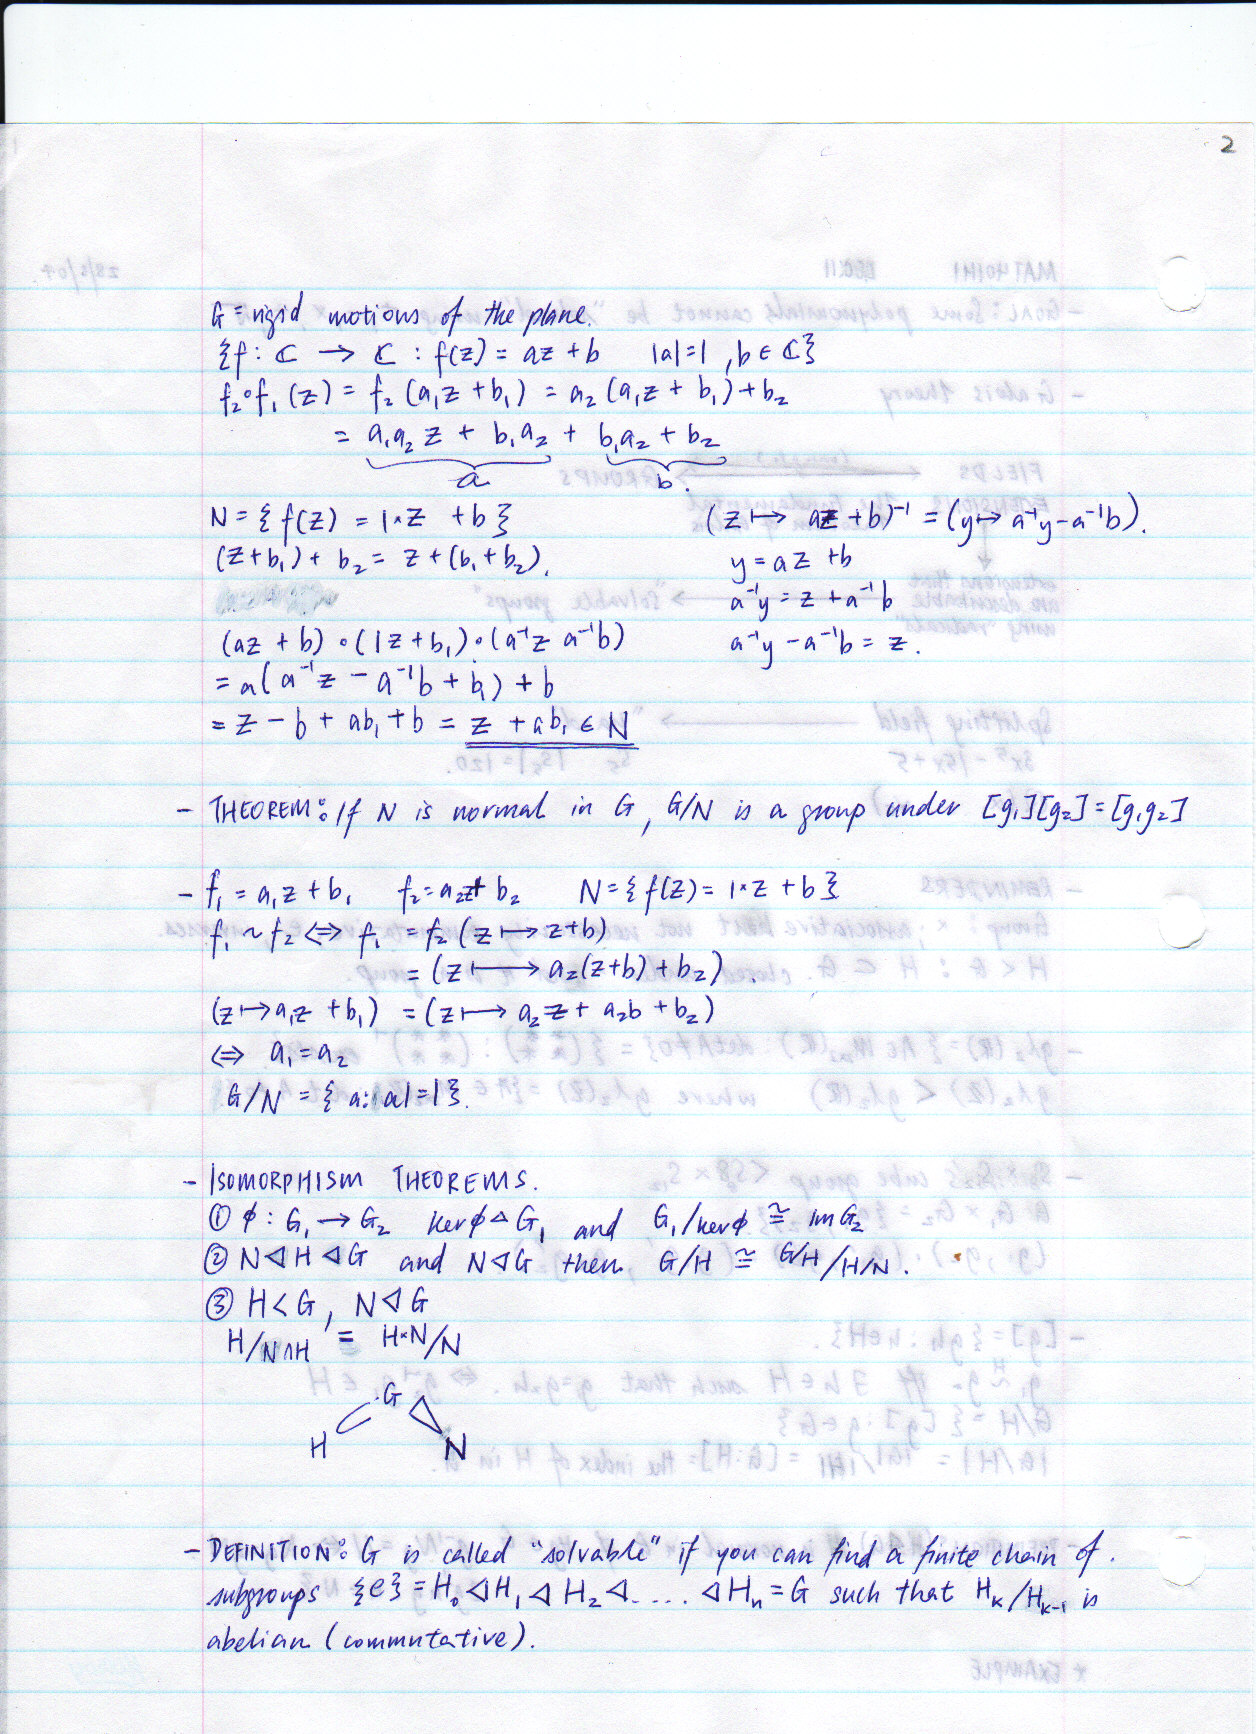 07-401 lecture 11 pg 2.jpg